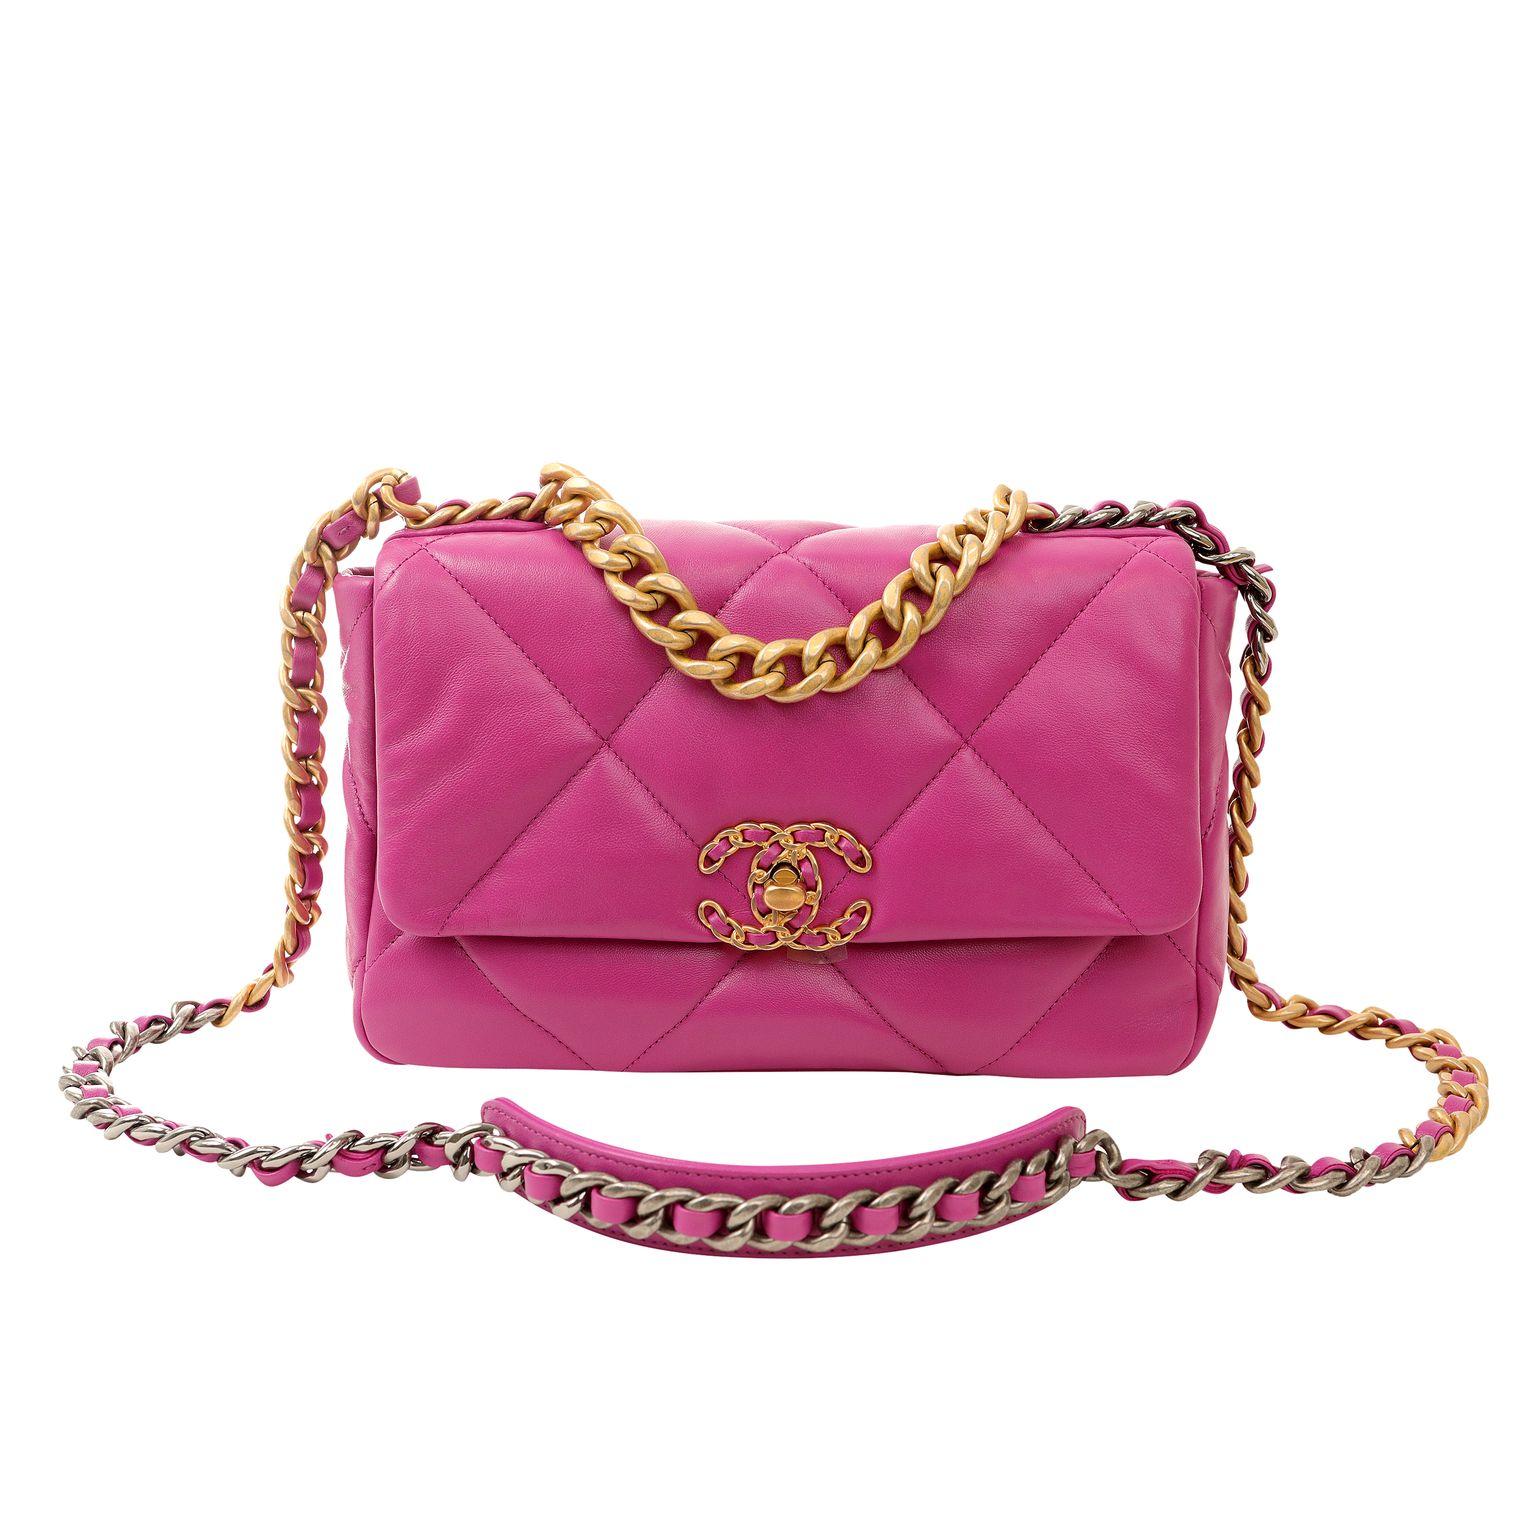 Women's Chanel Bright Purple Lambskin Small 19 Bag with Mixed metal Hardware For Sale